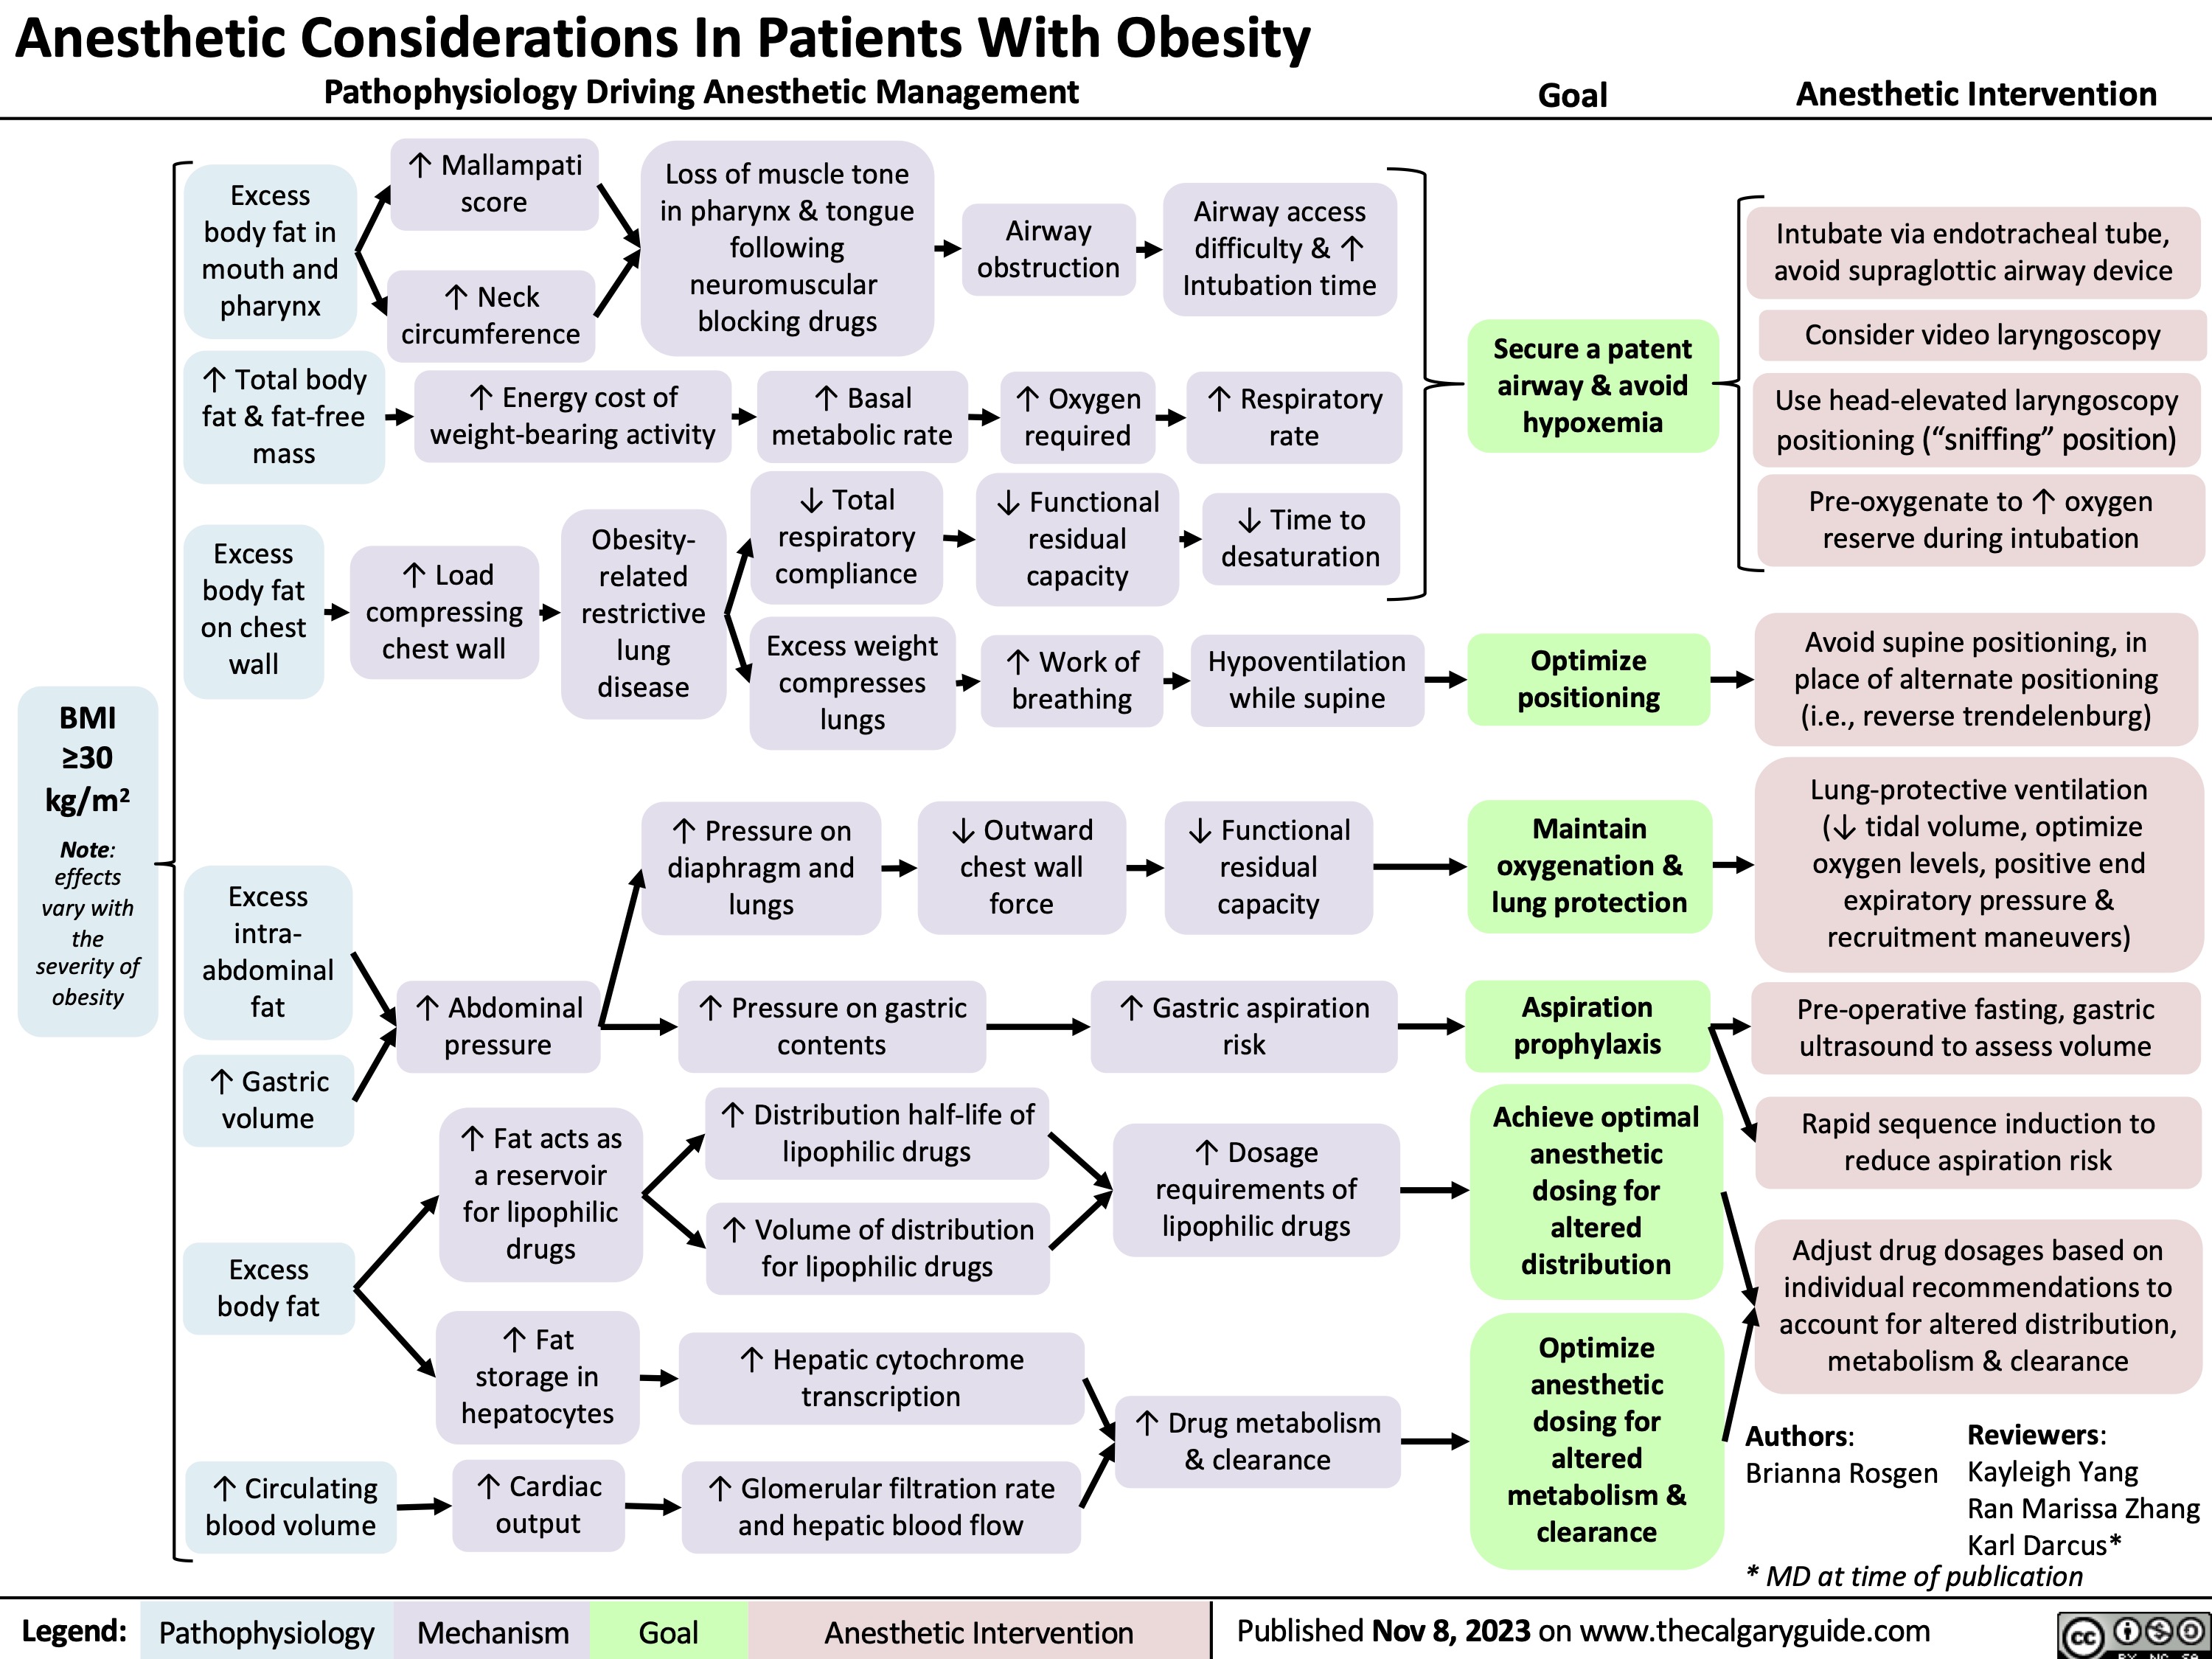 Anesthetic Considerations In Patients With Obesity
Pathophysiology Driving Anesthetic Management Goal Anesthetic Intervention
      Excess body fat in mouth and pharynx
↑ Total body fat & fat-free mass
↑ Mallampati score
↑ Neck circumference
Loss of muscle tone in pharynx & tongue following
neuromuscular blocking drugs
Airway access
difficulty & ↑ Intubation time
↑ Respiratory rate
↓ Time to desaturation
Hypoventilation while supine
↓ Functional residual capacity
↑ Gastric aspiration risk
↑ Dosage requirements of lipophilic drugs
↑ Drug metabolism & clearance
             ↑ Energy cost of weight-bearing activity
↑ Basal metabolic rate
↓ Total respiratory compliance
Excess weight compresses lungs
Airway obstruction
↑ Oxygen required
↓ Functional residual capacity
↑ Work of breathing
Secure a patent airway & avoid hypoxemia
Optimize positioning
Maintain oxygenation & lung protection
Aspiration prophylaxis
Achieve optimal anesthetic dosing for altered distribution
Optimize anesthetic dosing for altered metabolism & clearance
Intubate via endotracheal tube, avoid supraglottic airway device
Consider video laryngoscopy
Use head-elevated laryngoscopy positioning (“sniffing” position)
Pre-oxygenate to ↑ oxygen reserve during intubation
Avoid supine positioning, in place of alternate positioning (i.e., reverse trendelenburg)
Lung-protective ventilation (↓ tidal volume, optimize oxygen levels, positive end
expiratory pressure & recruitment maneuvers)
Pre-operative fasting, gastric ultrasound to assess volume
Rapid sequence induction to reduce aspiration risk
Adjust drug dosages based on individual recommendations to account for altered distribution, metabolism & clearance
      Excess body fat on chest wall
Excess intra- abdominal fat
↑ Gastric volume
Excess body fat
↑ Circulating blood volume
Obesity- related restrictive lung disease
 ↑ Load compressing chest wall
      BMI
≥30
kg/m2
Note: effects vary with the severity of obesity
↑ Pressure on diaphragm and lungs
↓ Outward chest wall force
            ↑ Abdominal pressure
↑ Fat acts as a reservoir for lipophilic drugs
↑ Fat storage in hepatocytes
↑ Cardiac output
↑ Pressure on gastric contents
↑ Distribution half-life of lipophilic drugs
↑ Volume of distribution for lipophilic drugs
↑ Hepatic cytochrome transcription
↑ Glomerular filtration rate and hepatic blood flow
Authors: Brianna Rosgen
Reviewers: Kayleigh Yang
Ran Marissa Zhang
Karl Darcus*
                   * MD at time of publication
 Legend:
 Pathophysiology
Mechanism
 Goal
 Anesthetic Intervention
Published Nov 8, 2023 on www.thecalgaryguide.com
   